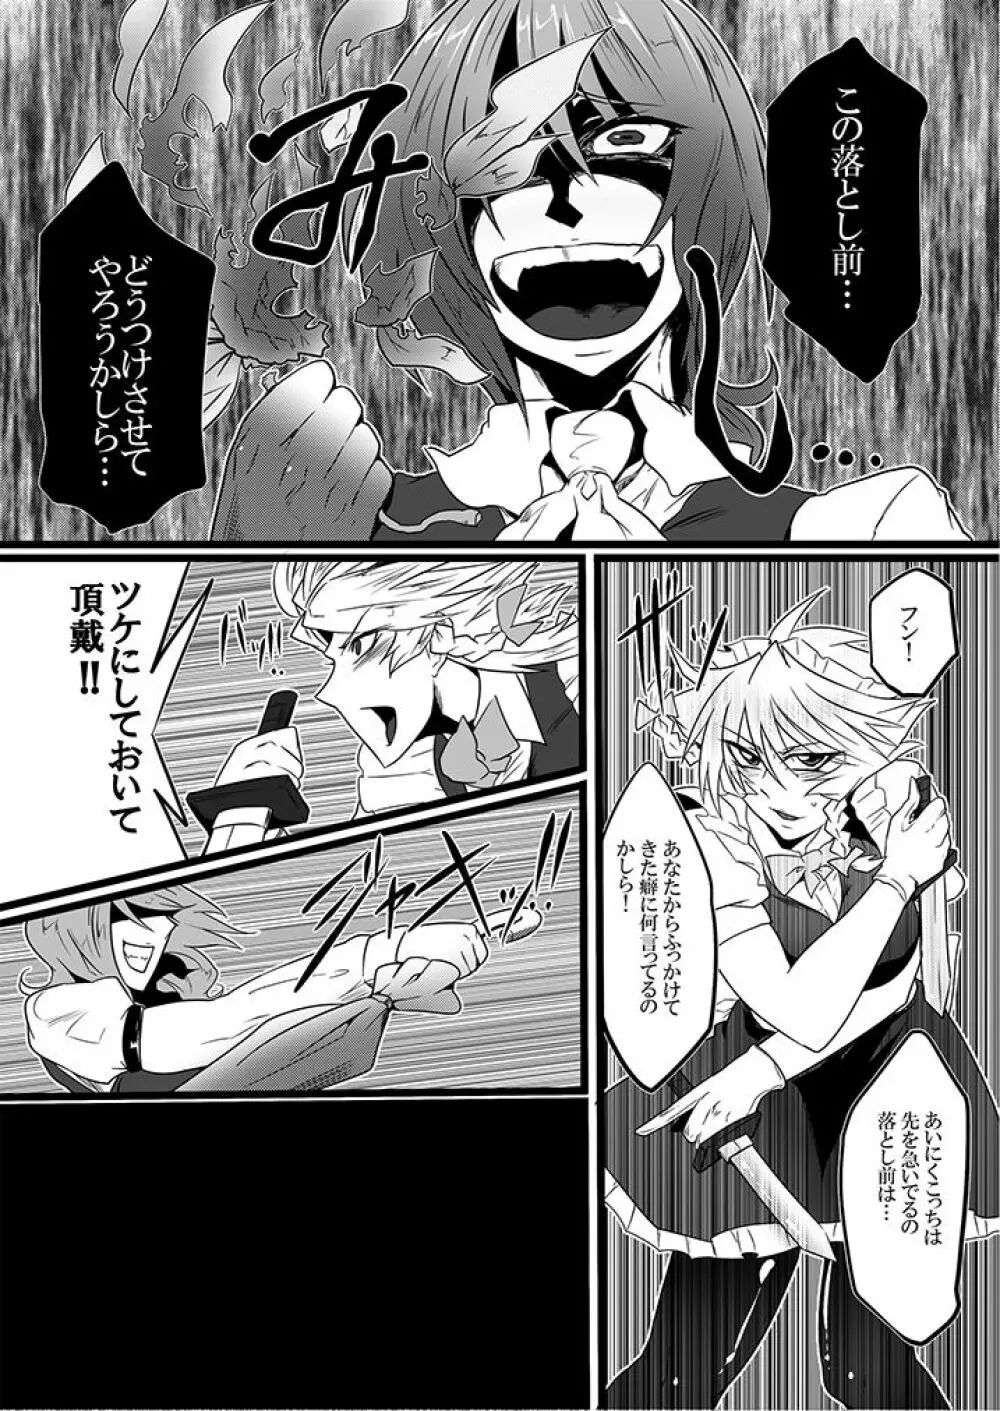 SAKUYA MAID in HEAVEN/ALL IN 1 - page114